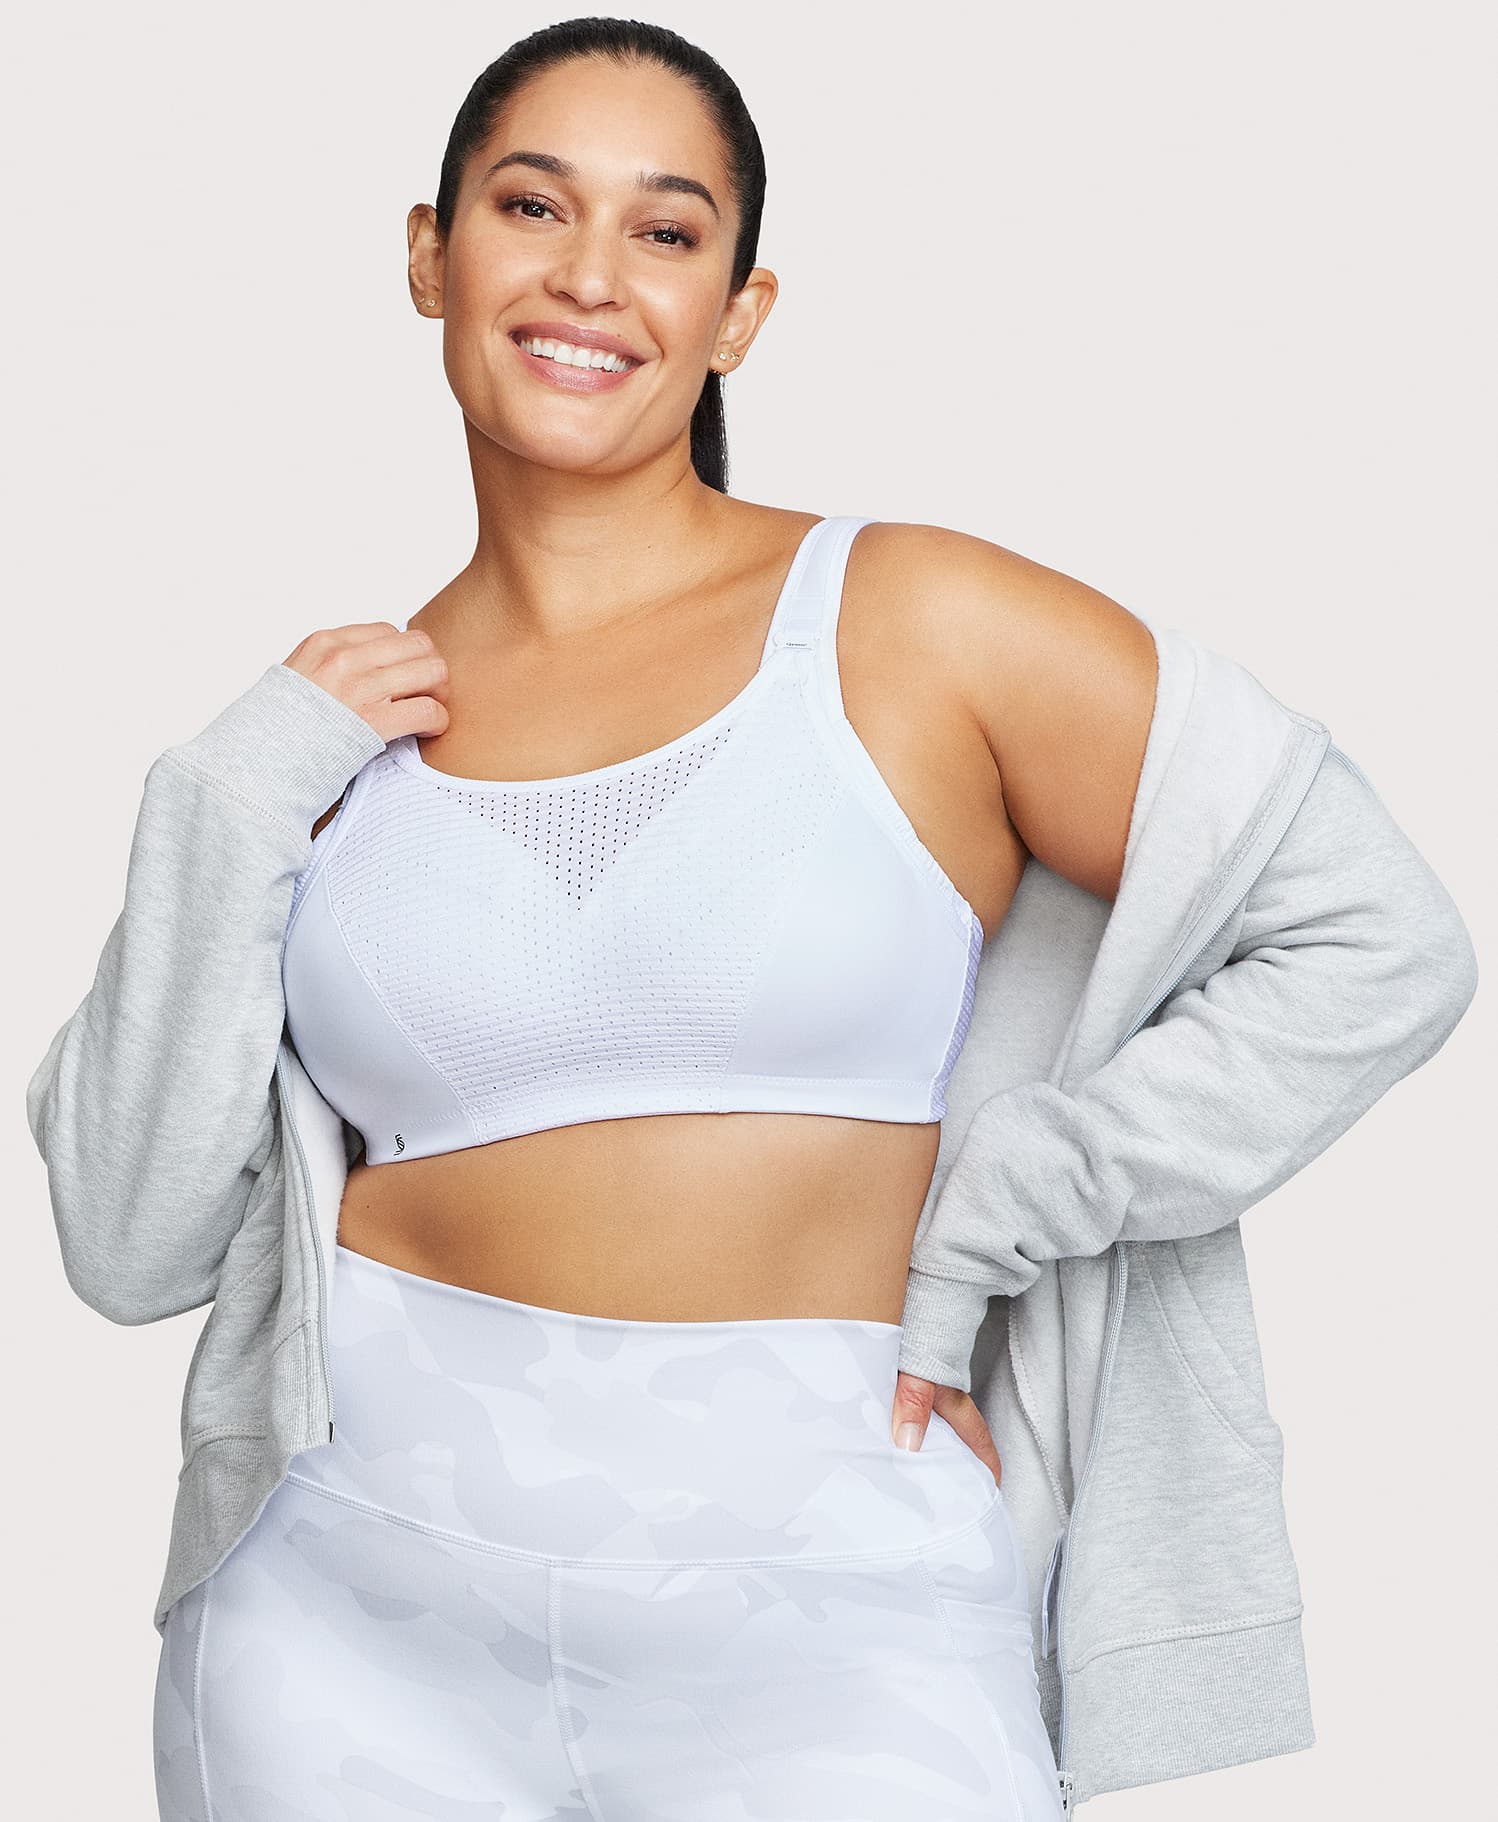 Made for those on the move, the Vanity Fair Wirefree Sport Bra